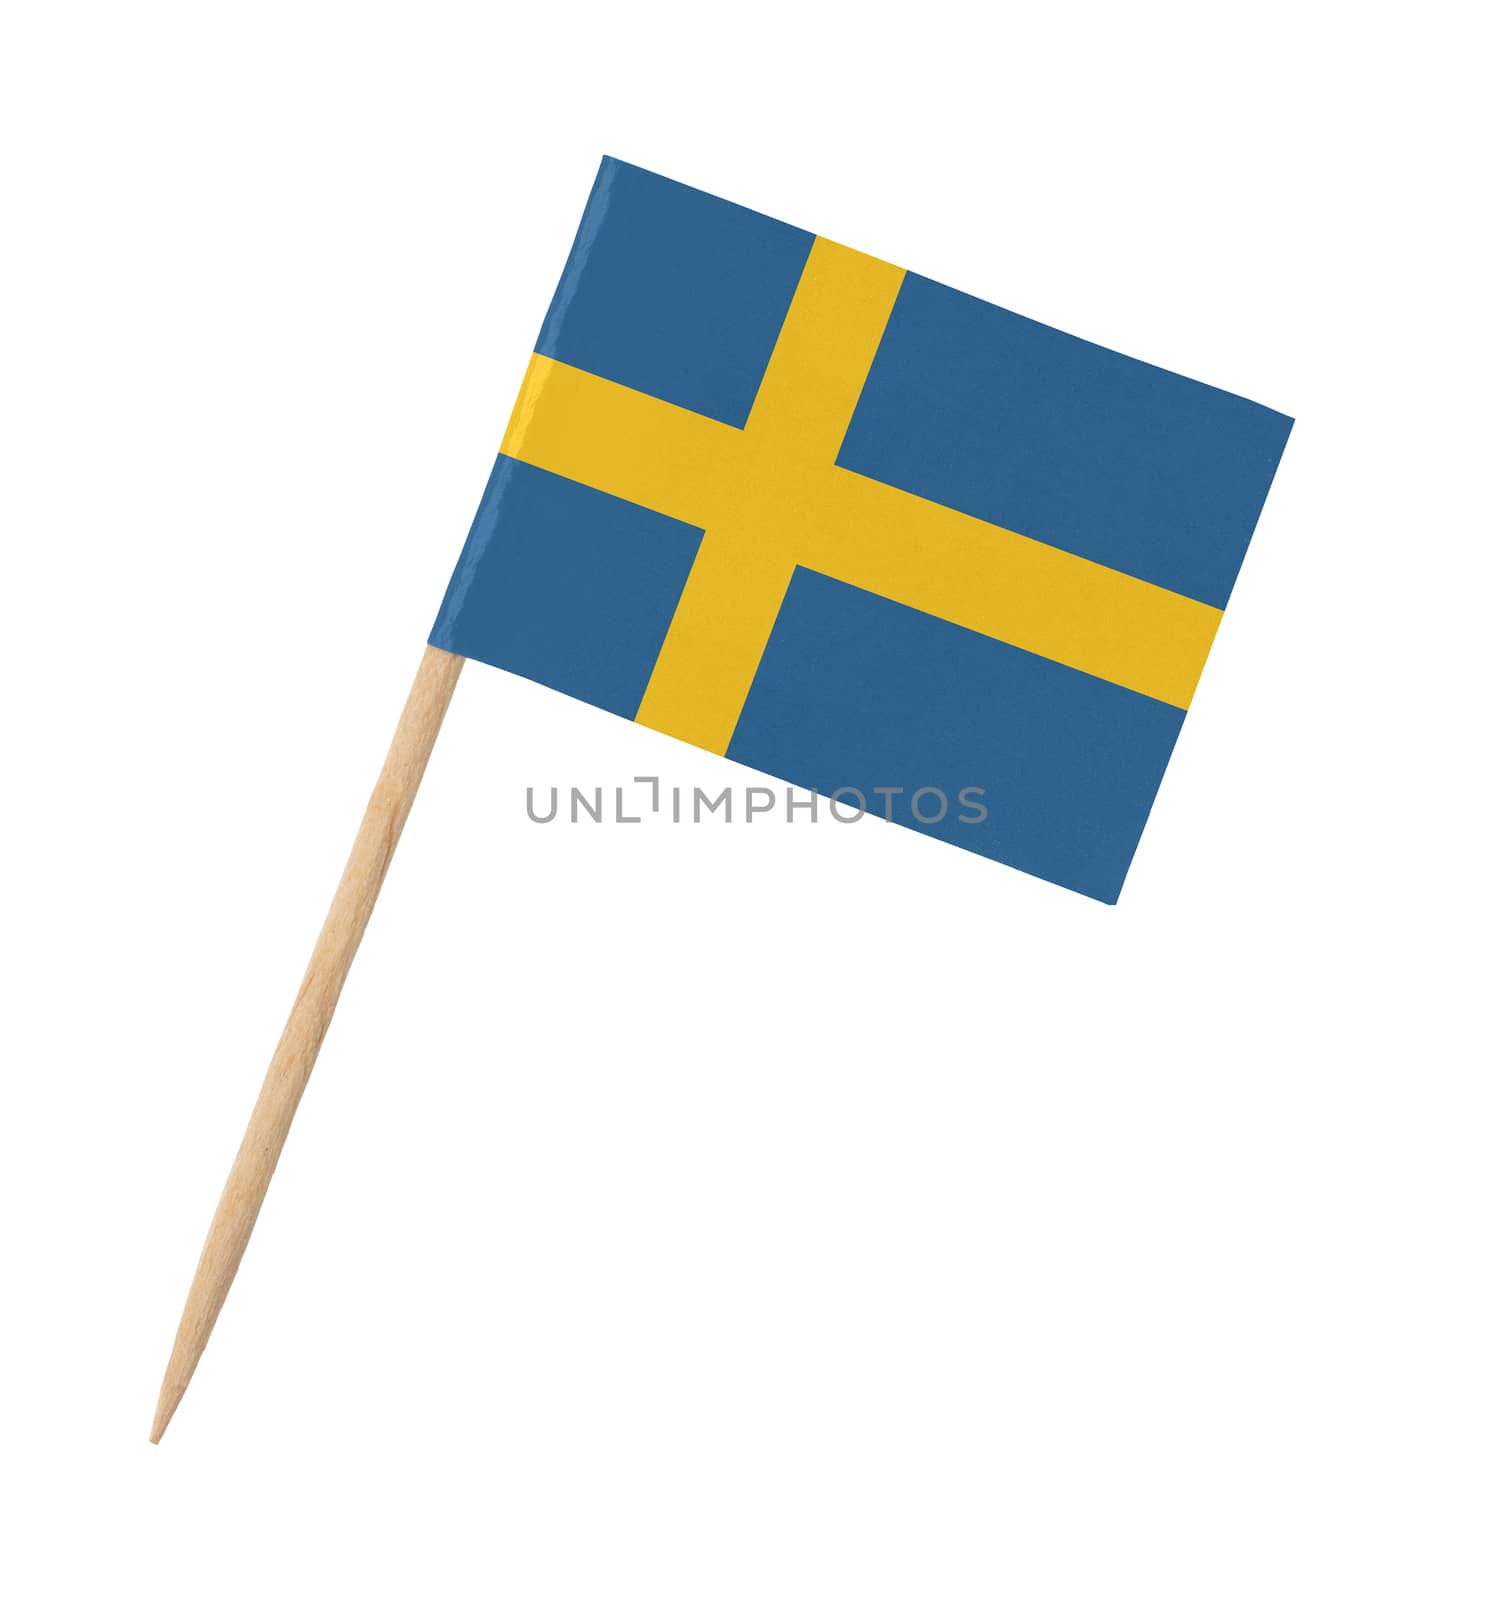 Small paper Swedish flag on wooden stick, isolated on white